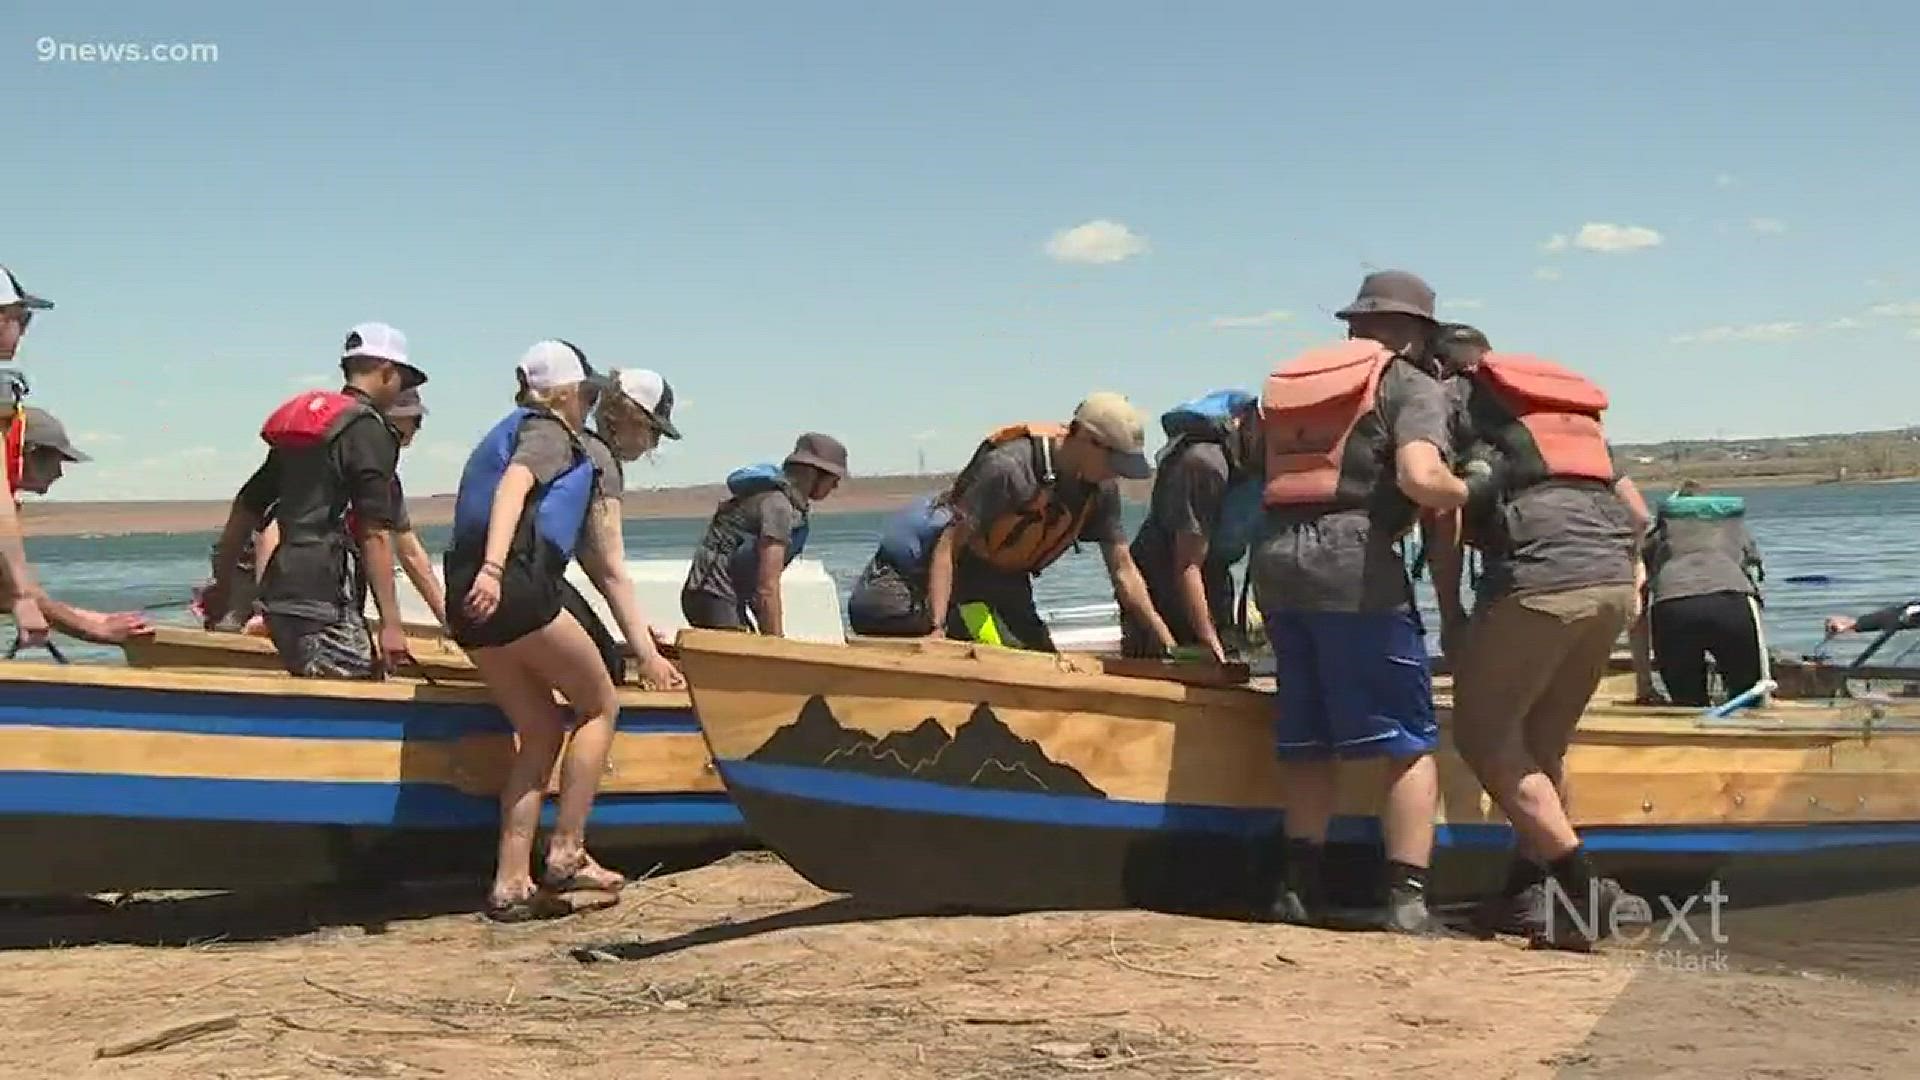 The homemade and funky boats are expected to make a splash coming from a landlocked state like Colorado.